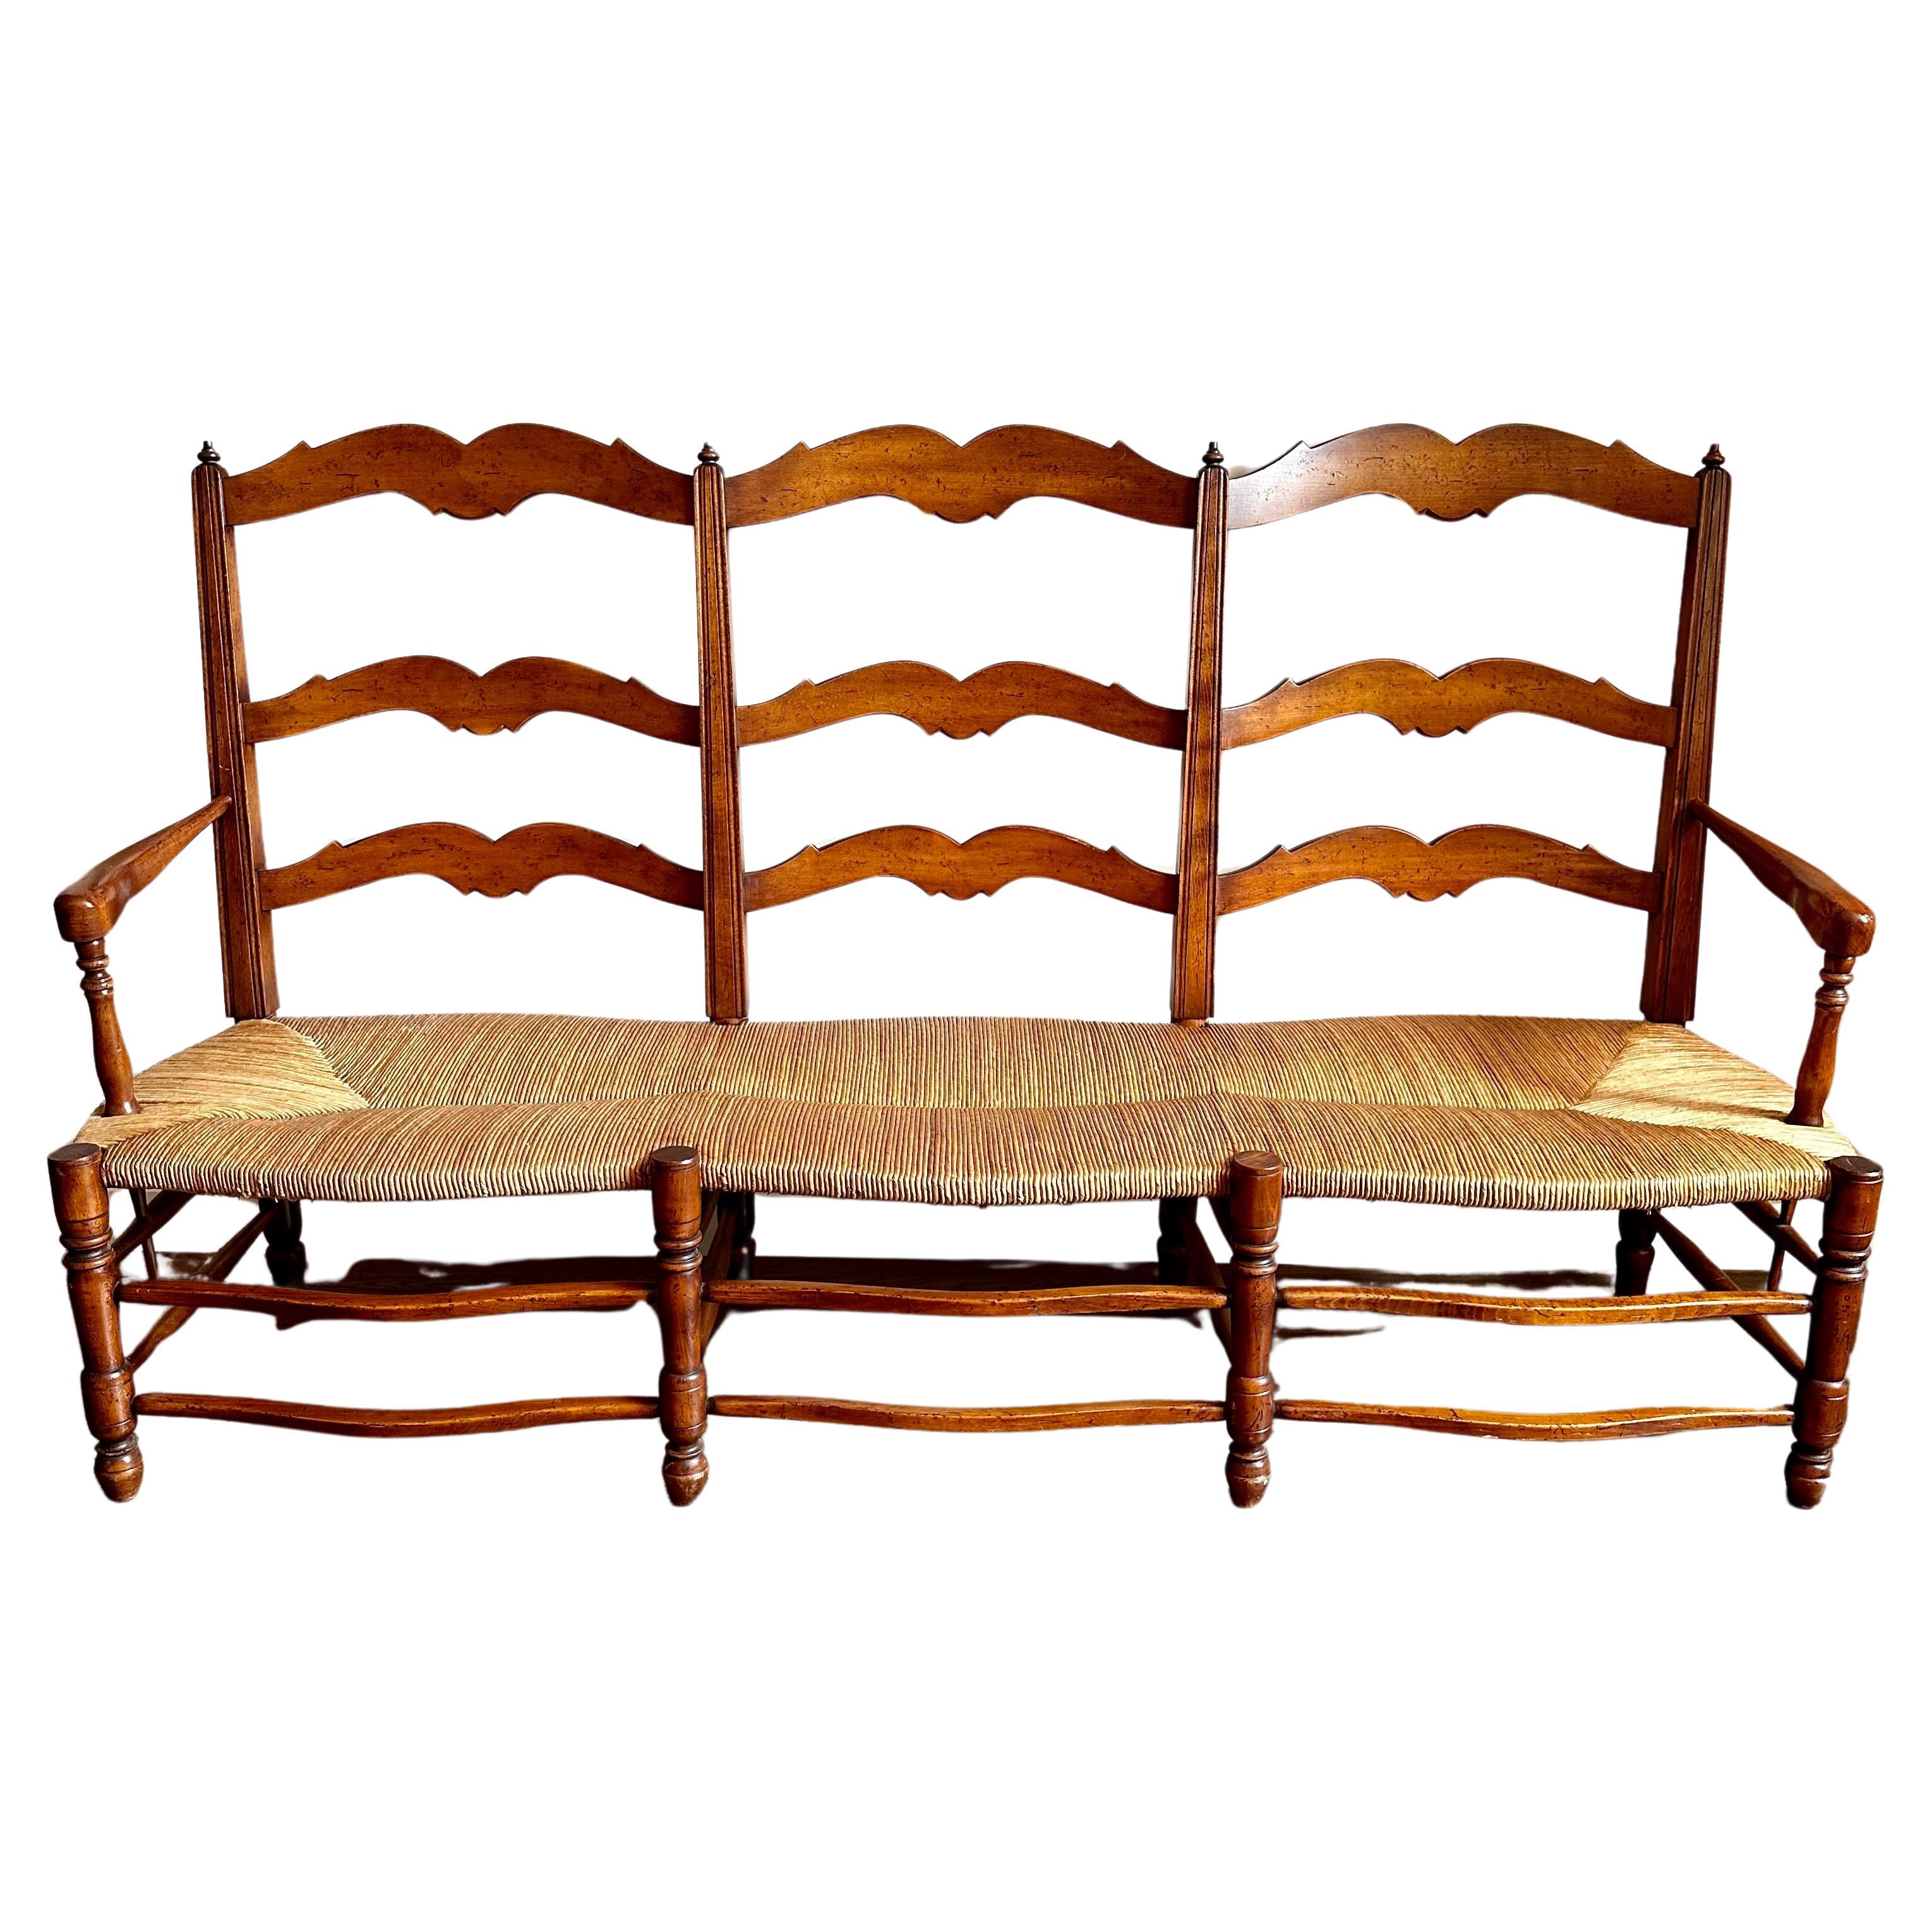 Large C19th Provencal Cherry Wood Rush Seat Bench For Sale